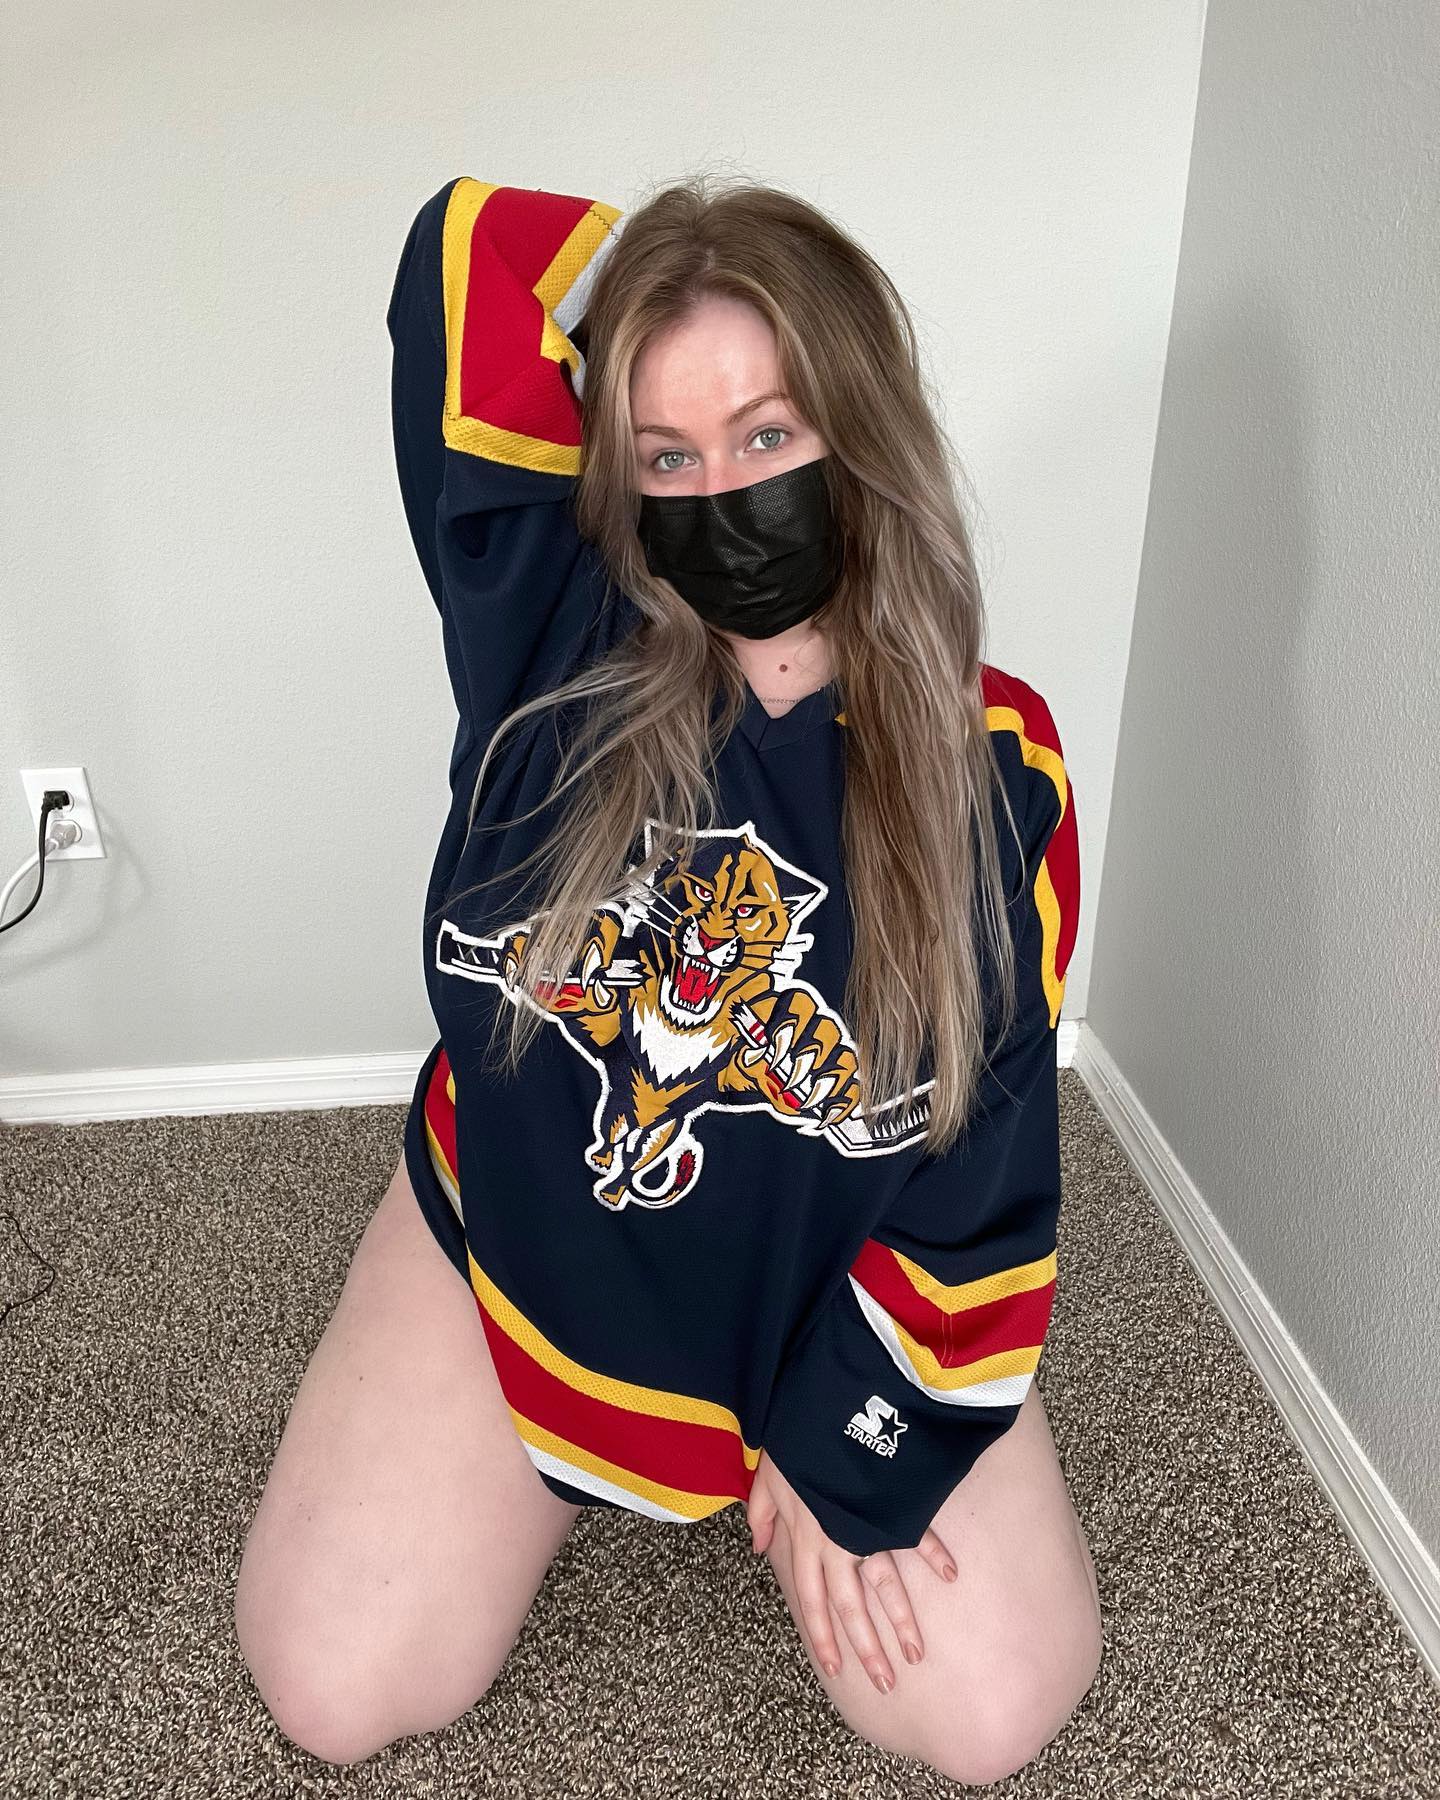 Girls that like hockey give the best head😈 LET’S GO PANTHERS! 🏒
————————————————————————

#curves #curvy #curvygirl #thicc #thiccgirls #thickgirlproblems #thickwhitegirl #thickthighsprettyeyes #thickthighssaveslives #girl #explorepage #explore #plussize #plussizemodel #thickwomen #thickwhitegirl #curves #curvy #curvyblonde #curvygirl #contentcreator #onlyfans #reddit #thickwomen #plussize #thick #naturalcurves #hourglassbody #nsfw #busty #bigbutt #bigchest #fetishmodel #breeding #thickness